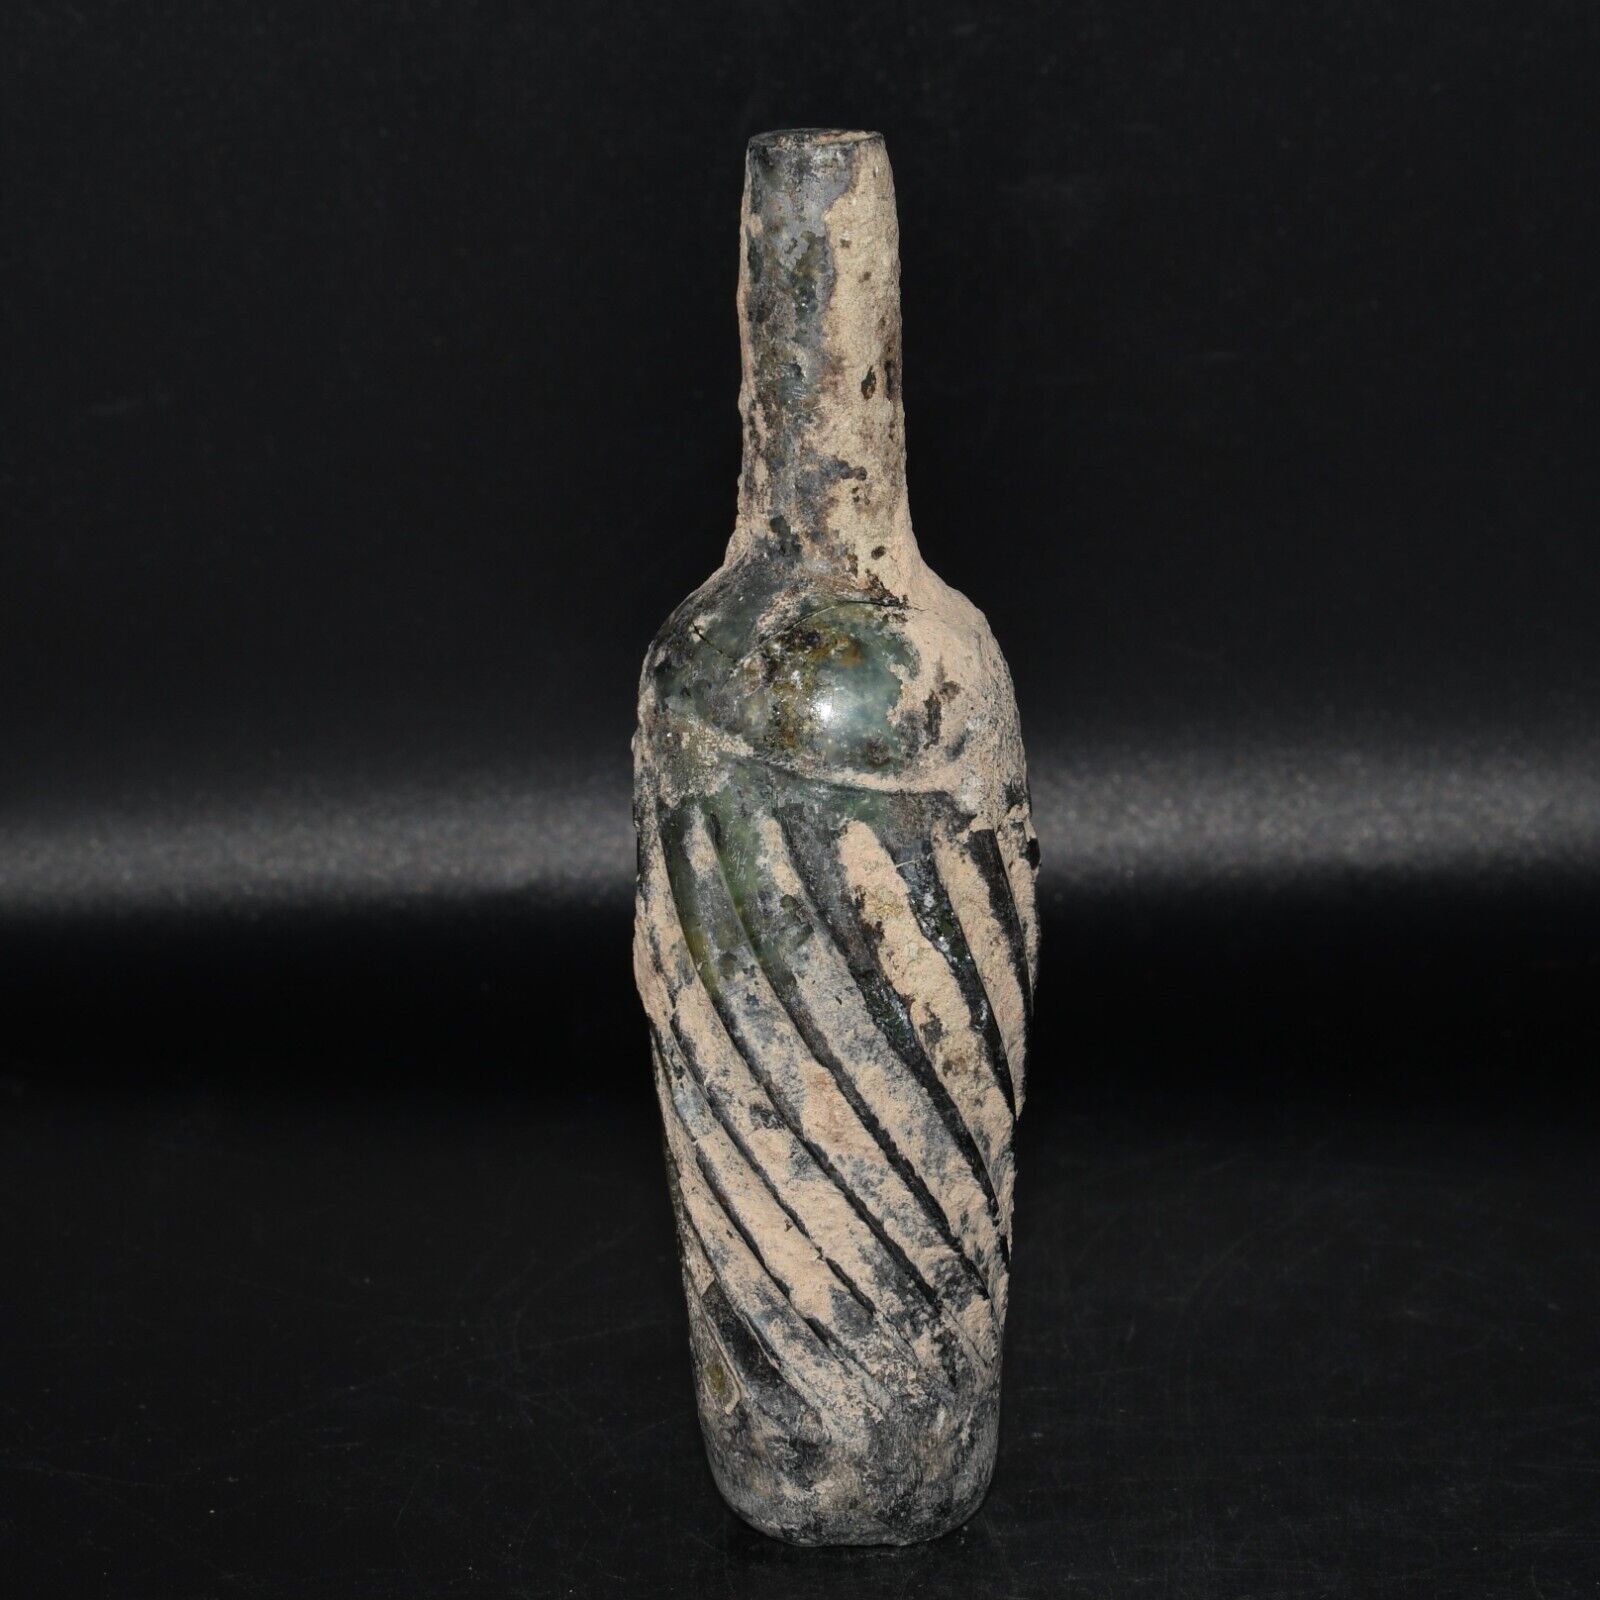 Large Ancient Intact Roman Glass Bottle with Long Spout Ca. 1st - 3rd Century AD